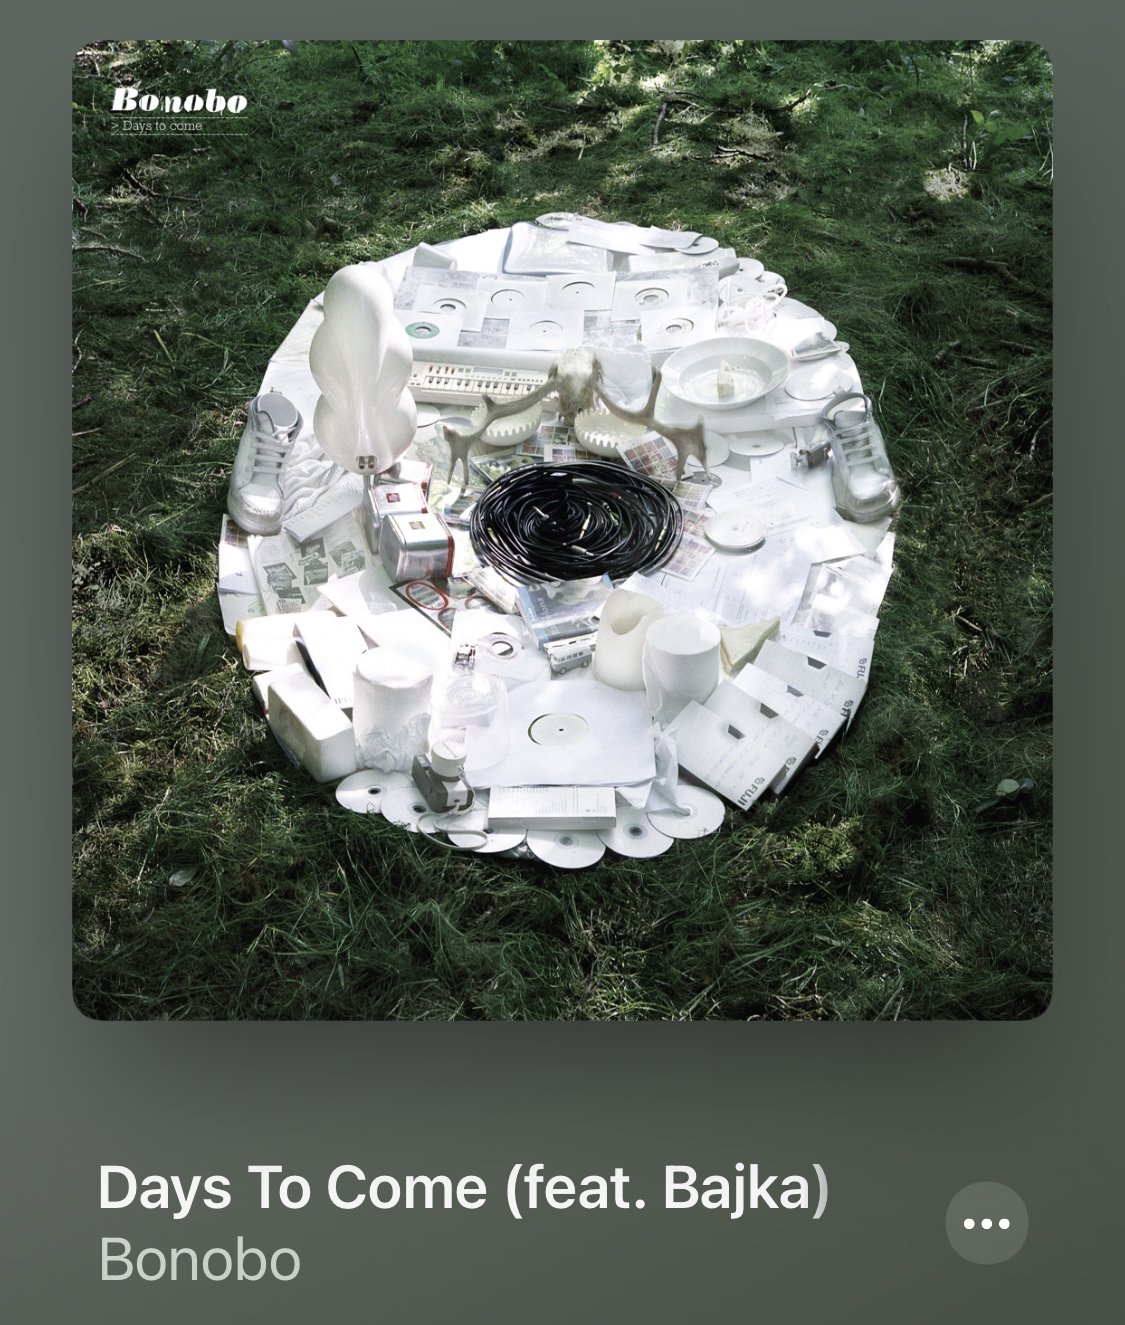  Today Bonobo is a popular name, whose DJ sets fill up venues like Avant Gardner in Bushwick. But true fans will admit that his DJ sets have nothing on his early work epitomized by the album “Days to Come.” The entire album is a must listen to, I pro